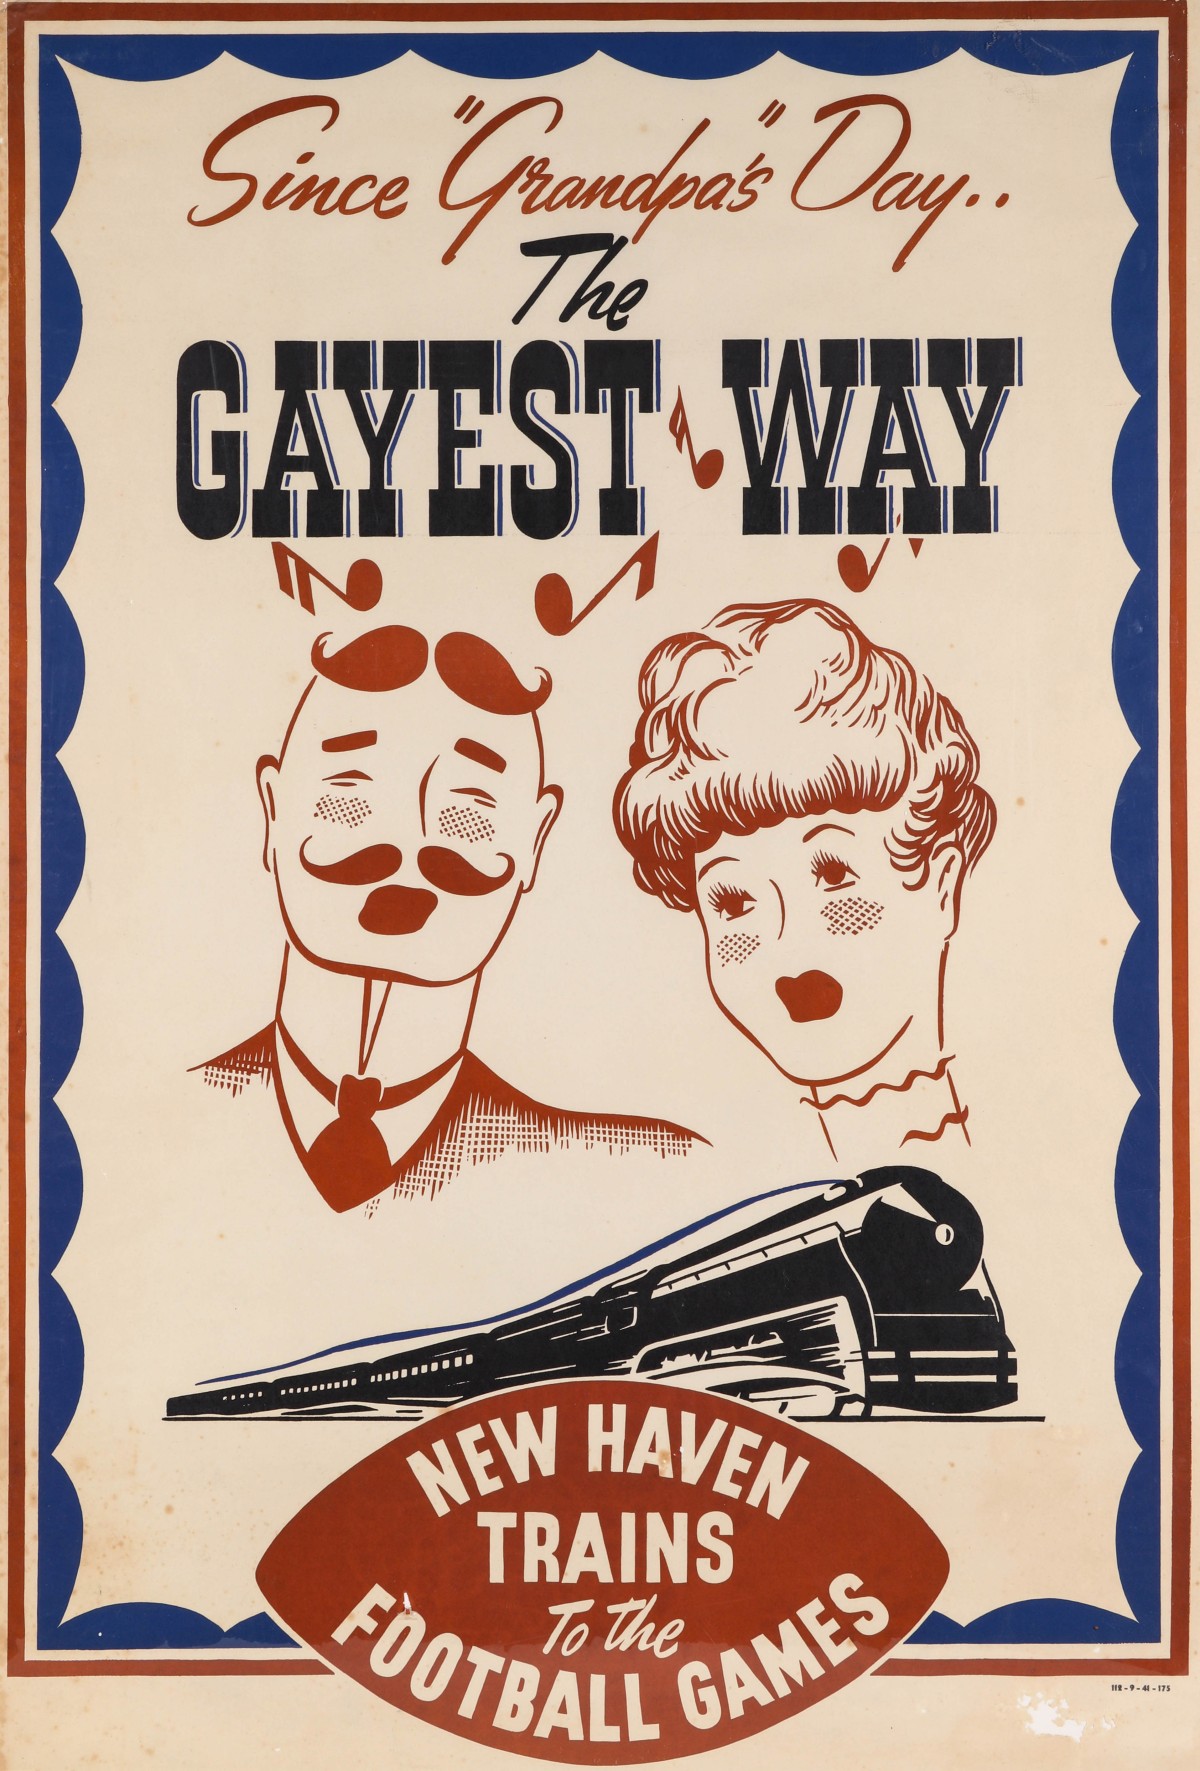 NEW HAVEN RAILROAD 'THE GAYEST WAY' ADVERTISING POSTER